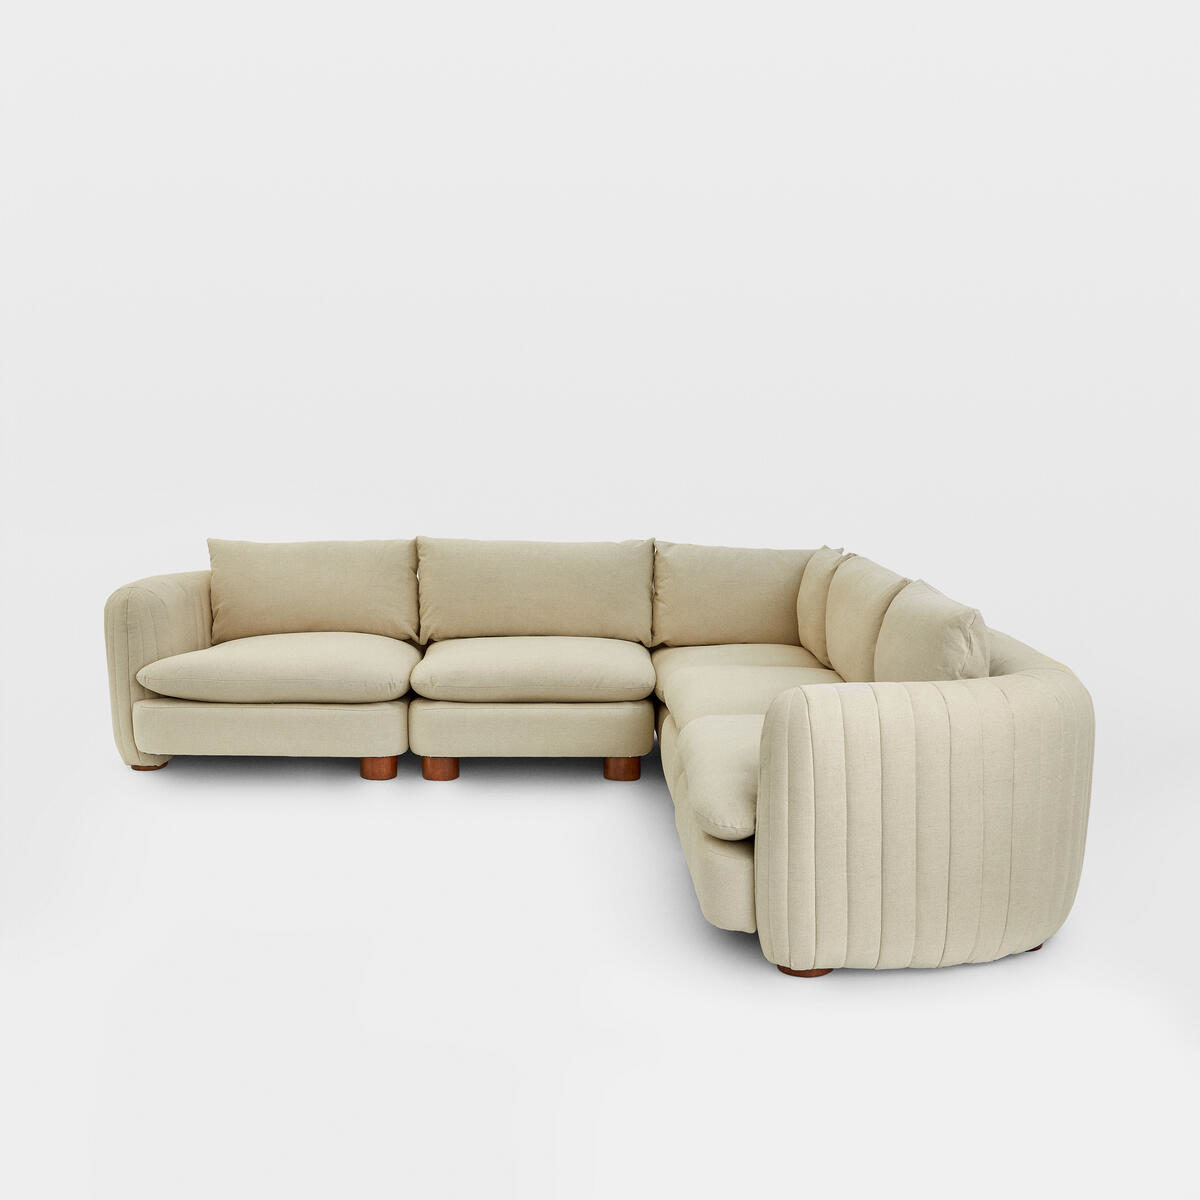 Modern Modular Corner Sofa With Tufted Curved Arms